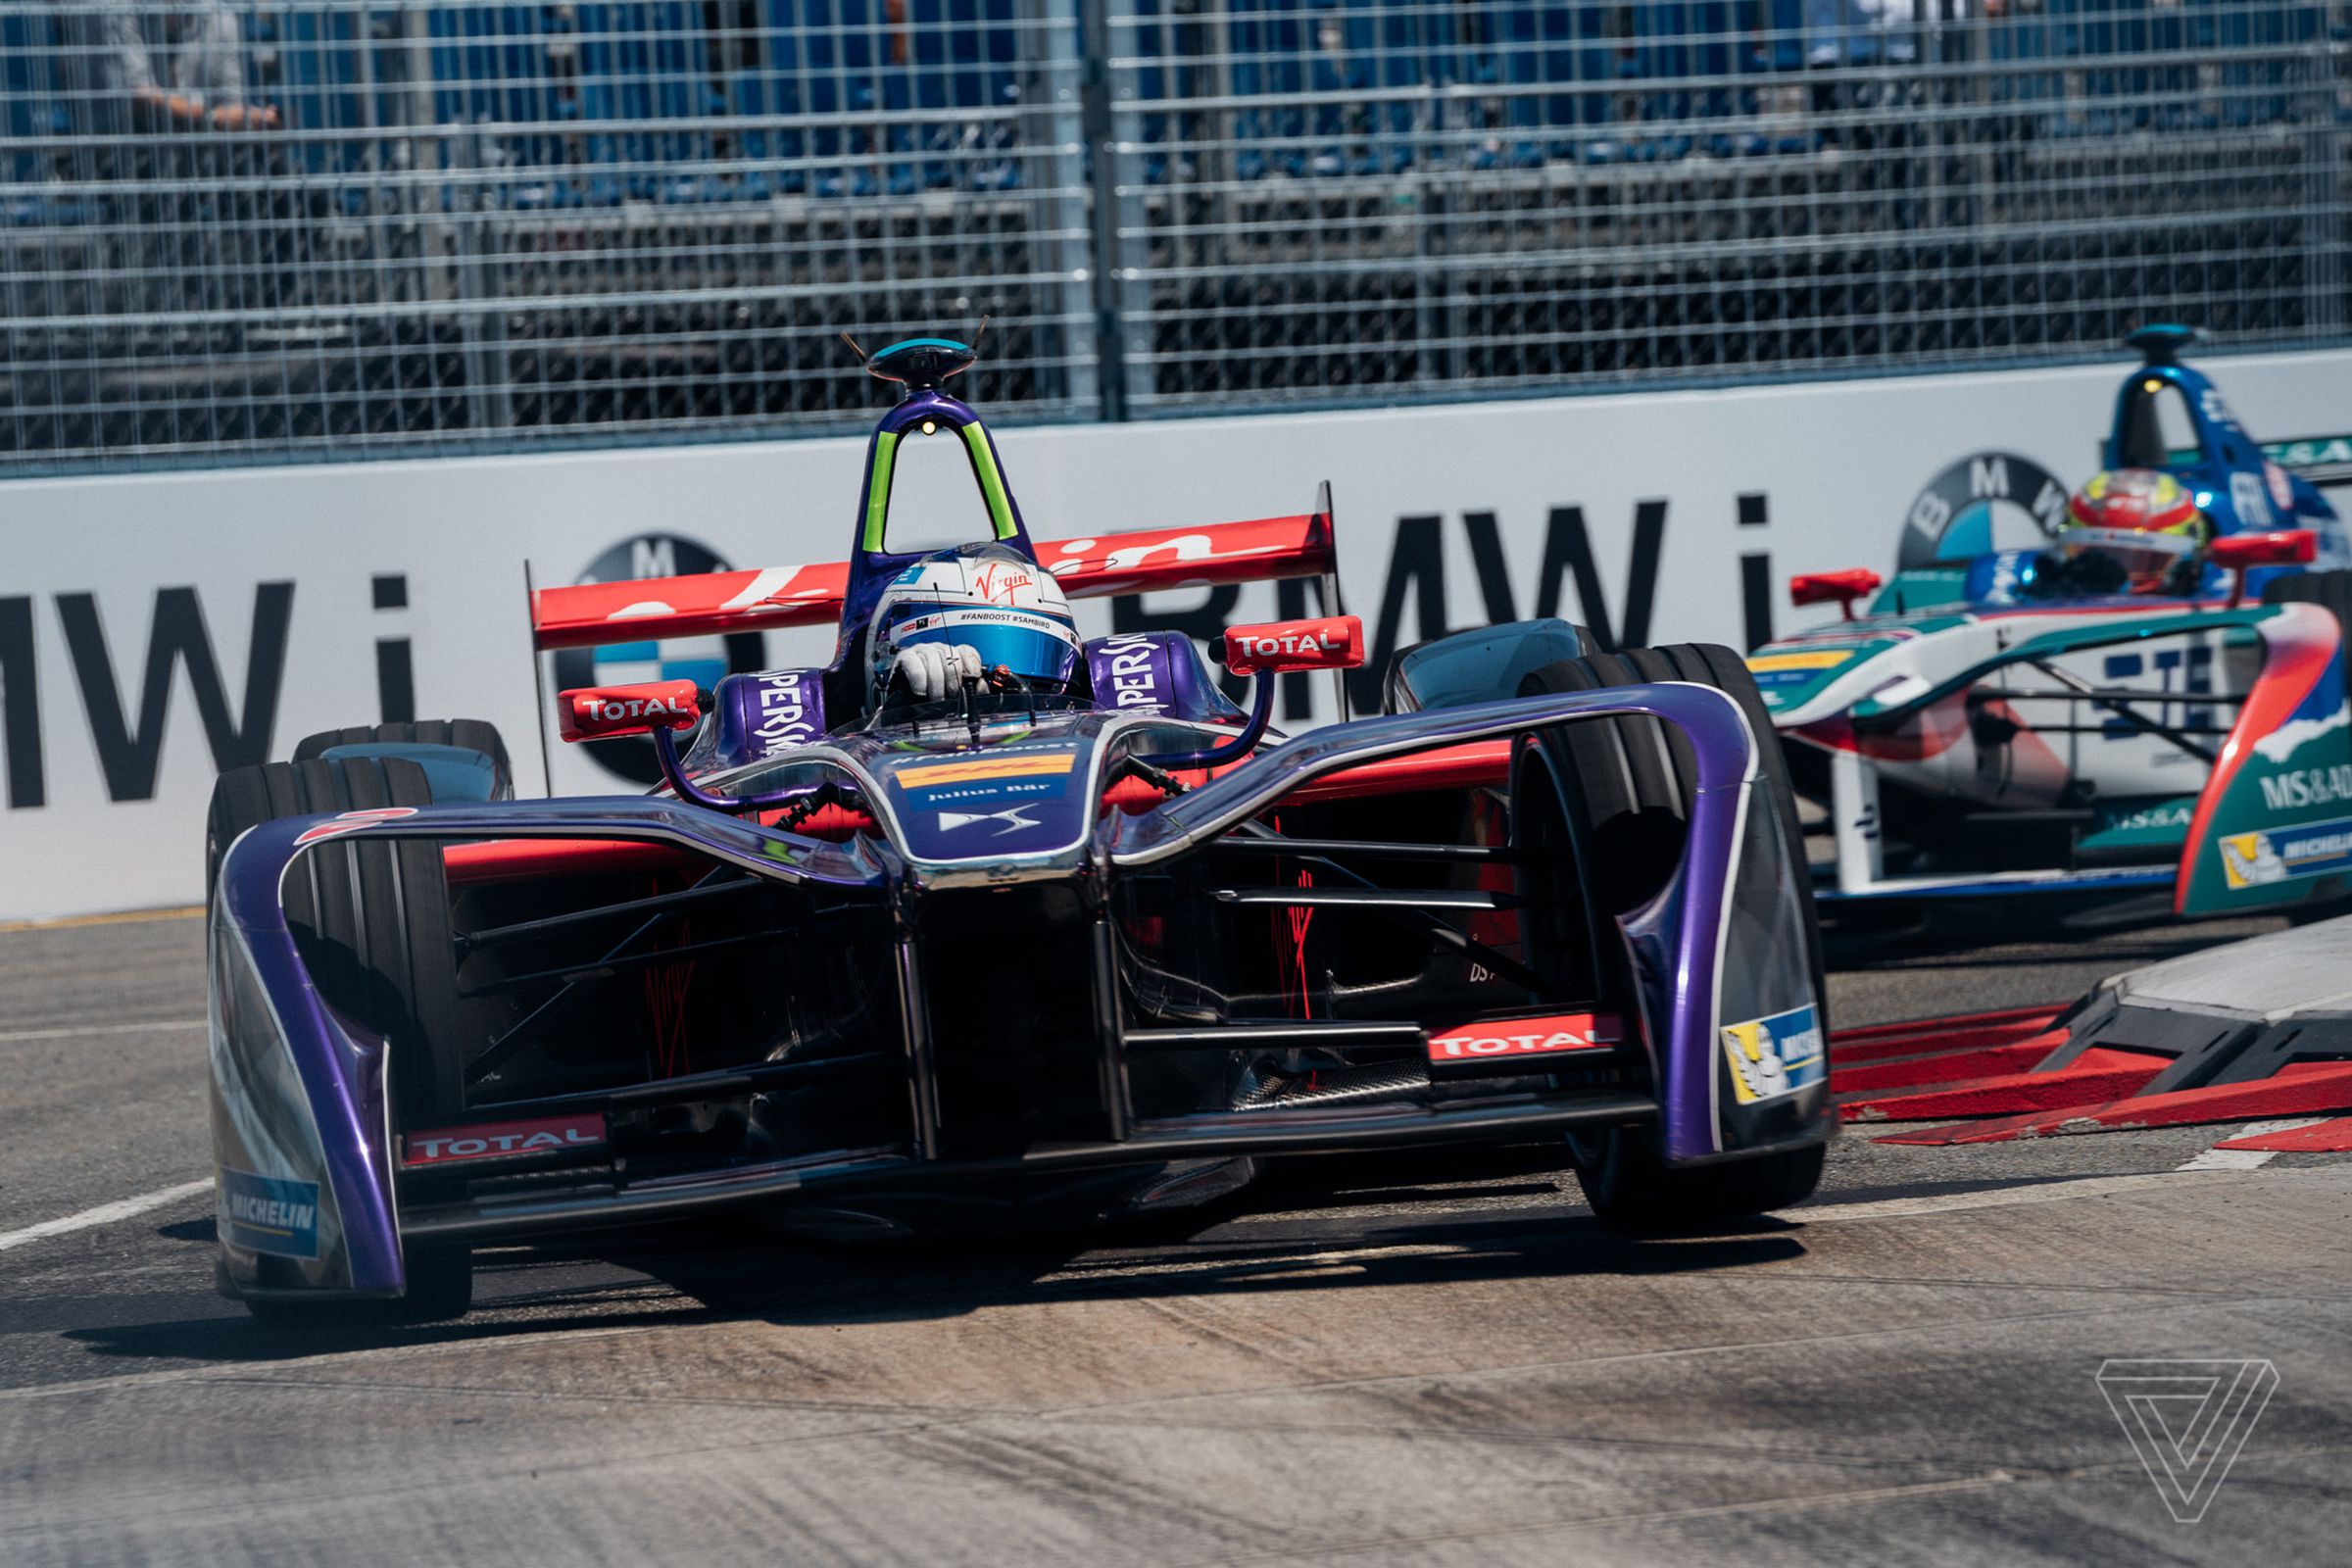 Bird said the car was the “best car [DS Virgin Racing] had ever given to me” after sweeping the weekend. This was the first time Bird and a few other drivers had ever visited NYC. “I will be writing a letter to [Formula E CEO] Alejandro Agag asking if we can have the whole championship here,” he joked after the race.